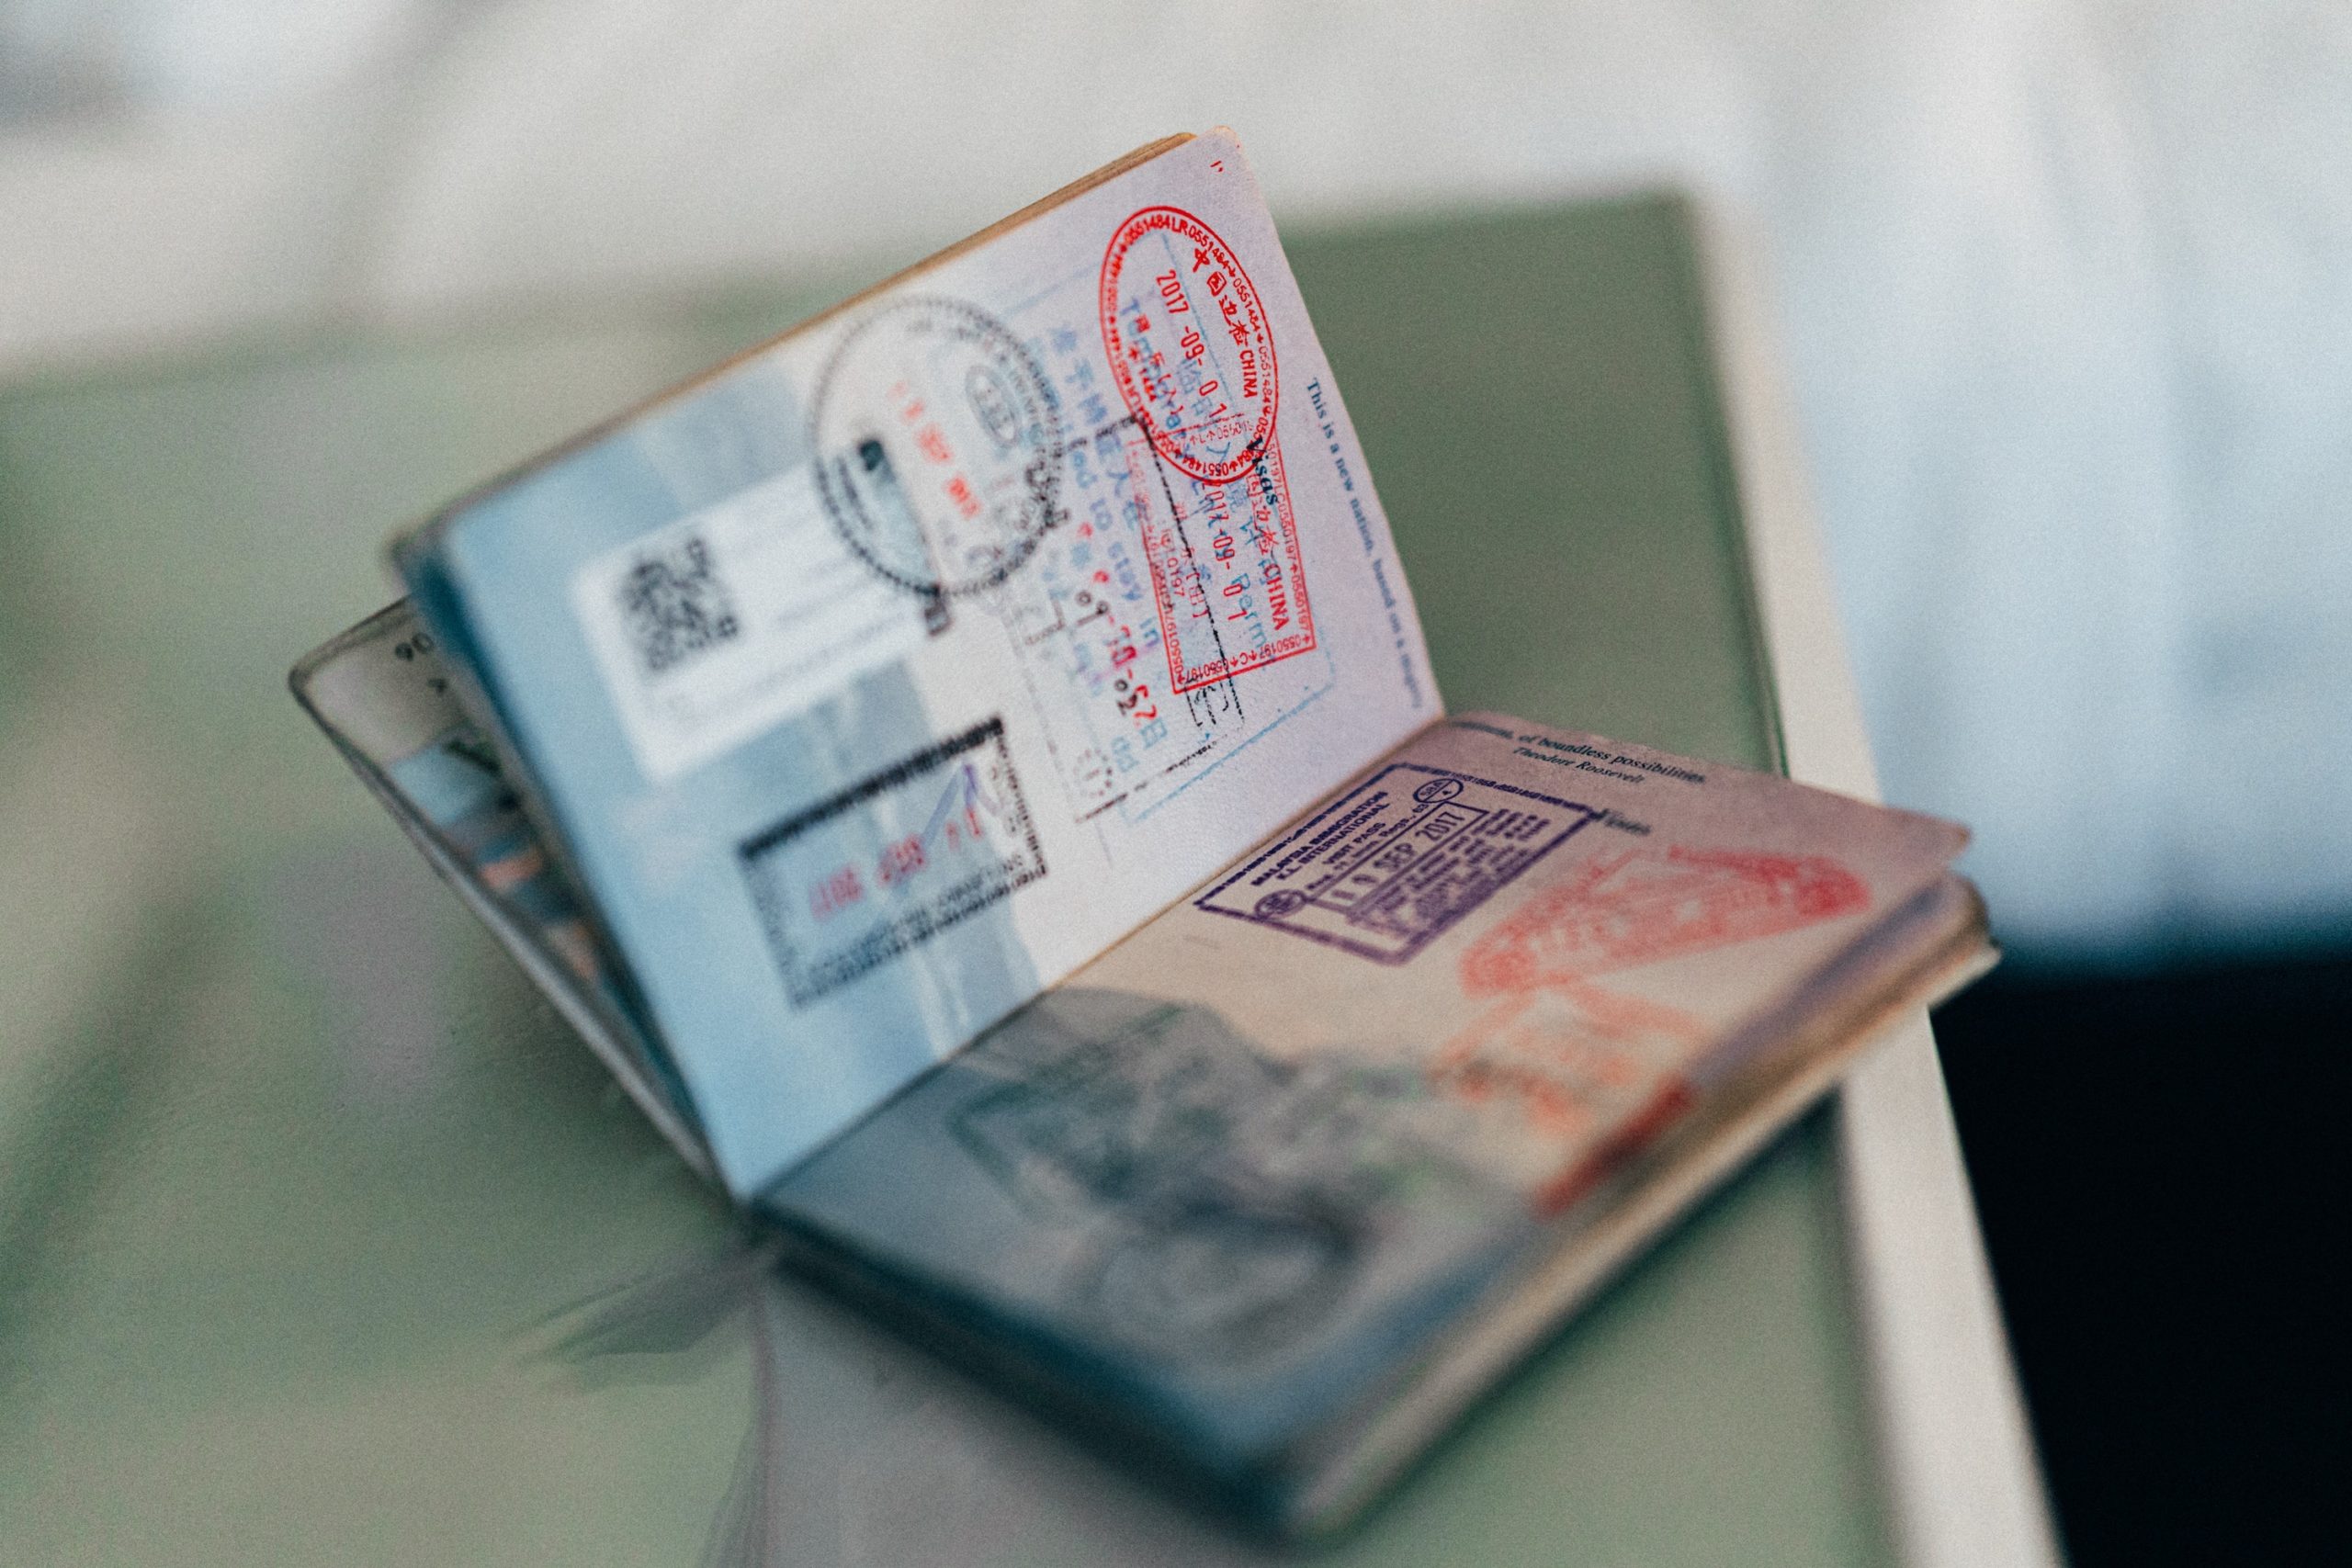 A Beginner's Guide to Global Entry